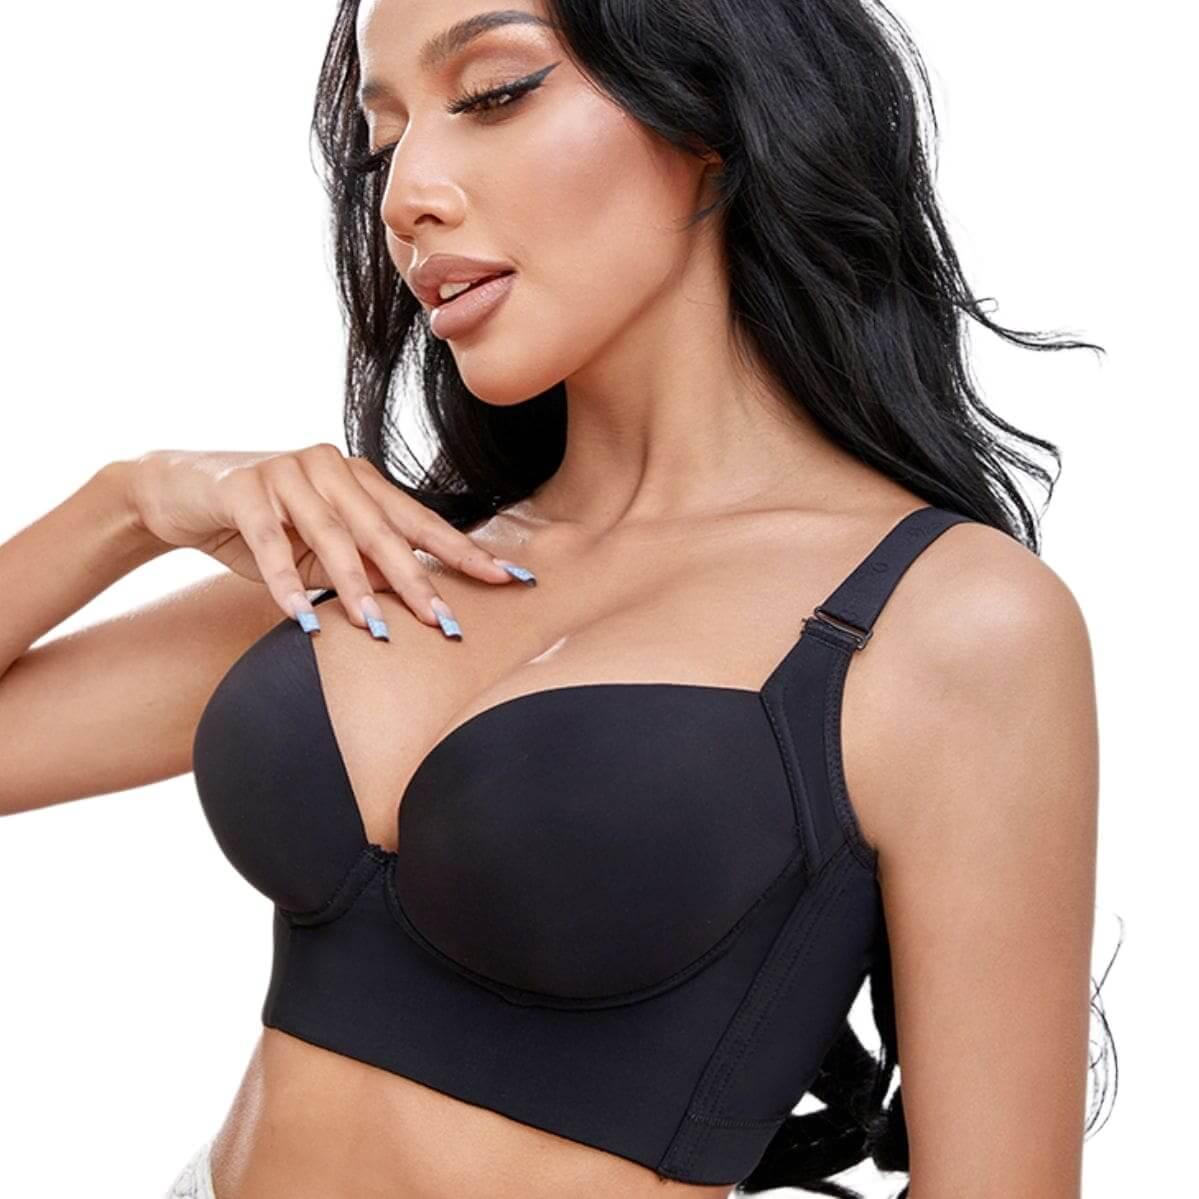 33% off on Wire-Free Push Up Deep Cup Bra